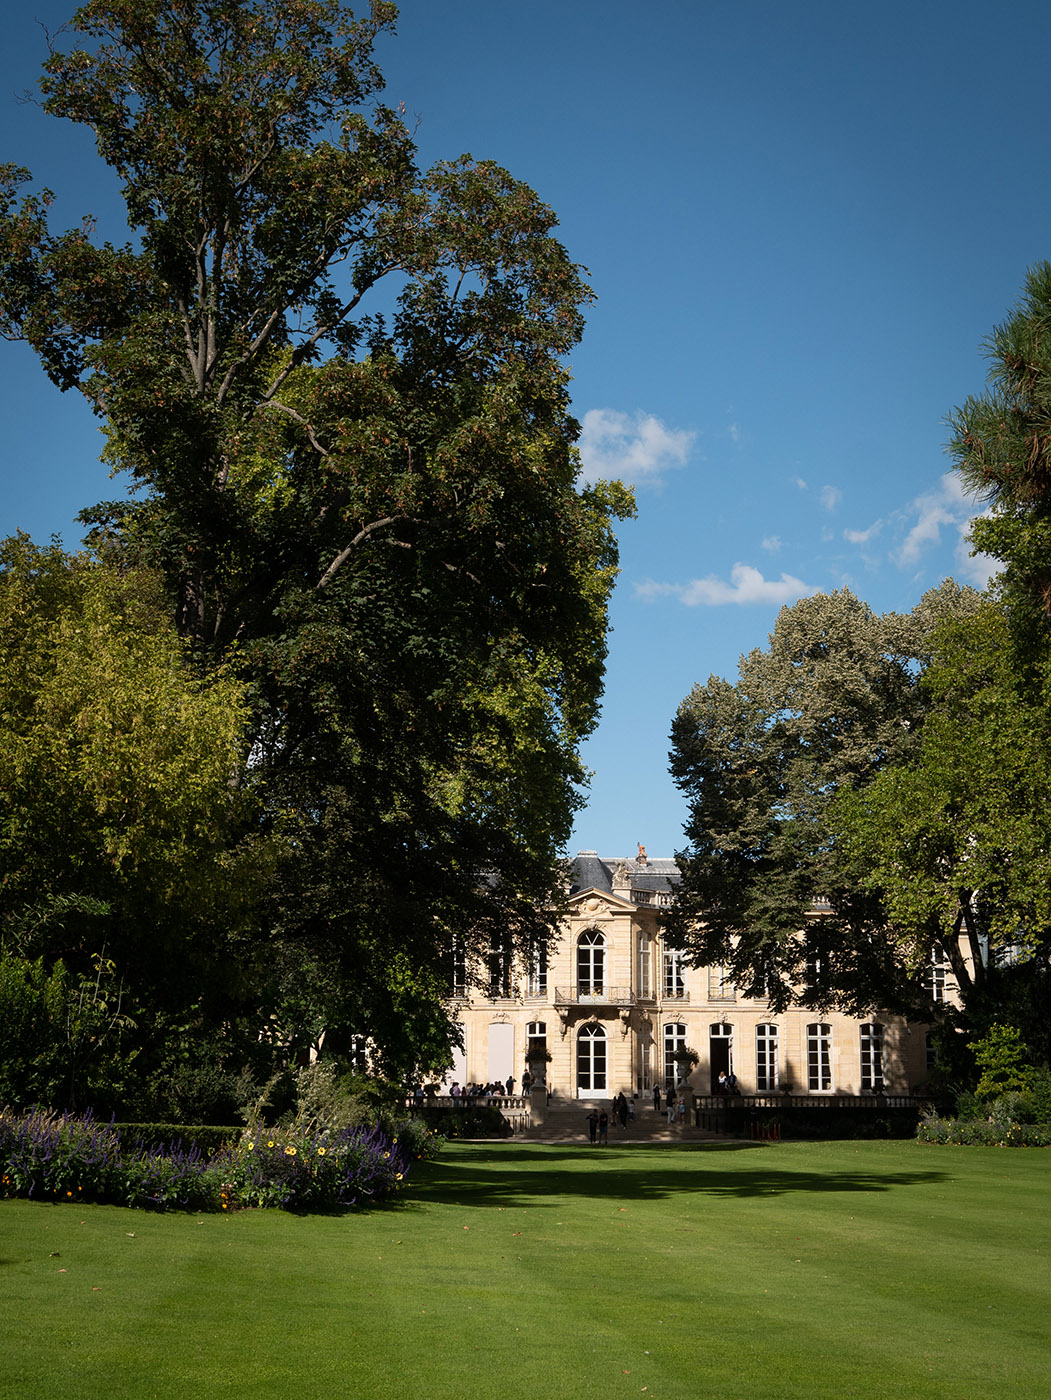 What does the Hôtel de Matignon, the residence of the French Prime Minister, look like? 17